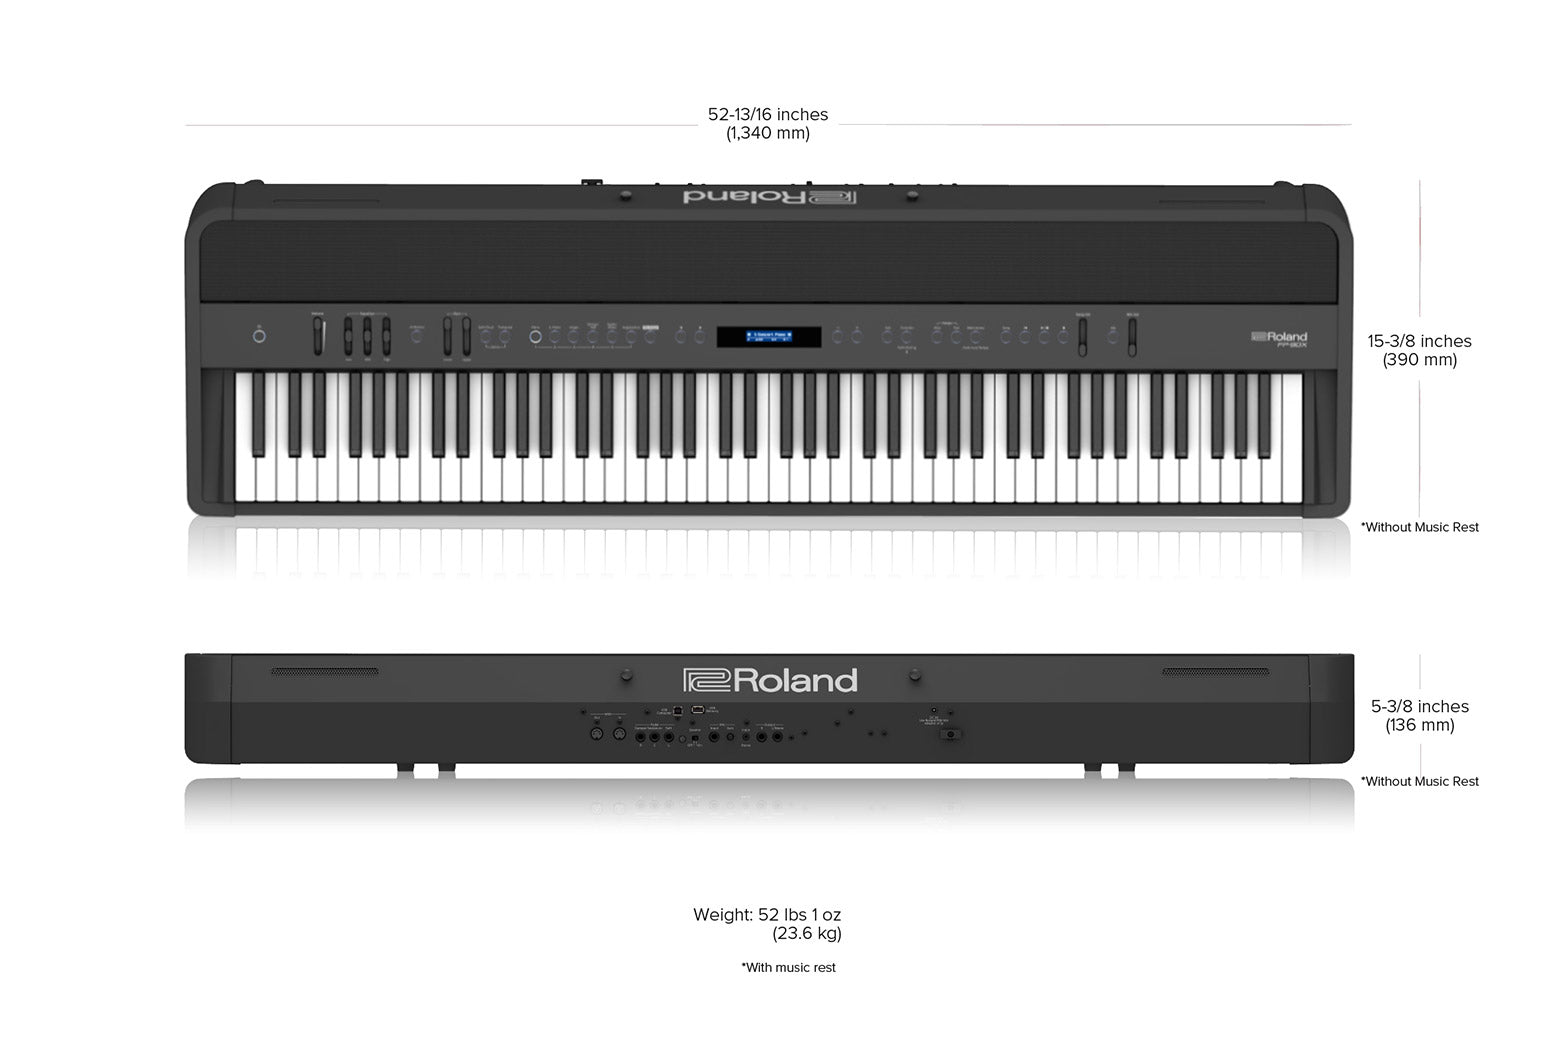 Roland FP-90X 88-key Digital Piano Musician Package with RH-5 Headphone and DP-10 Pedal - White (FP90X / FP 90X), ROLAND, DIGITAL PIANO, roland-digital-piano-fp-90x-wh, ZOSO MUSIC SDN BHD